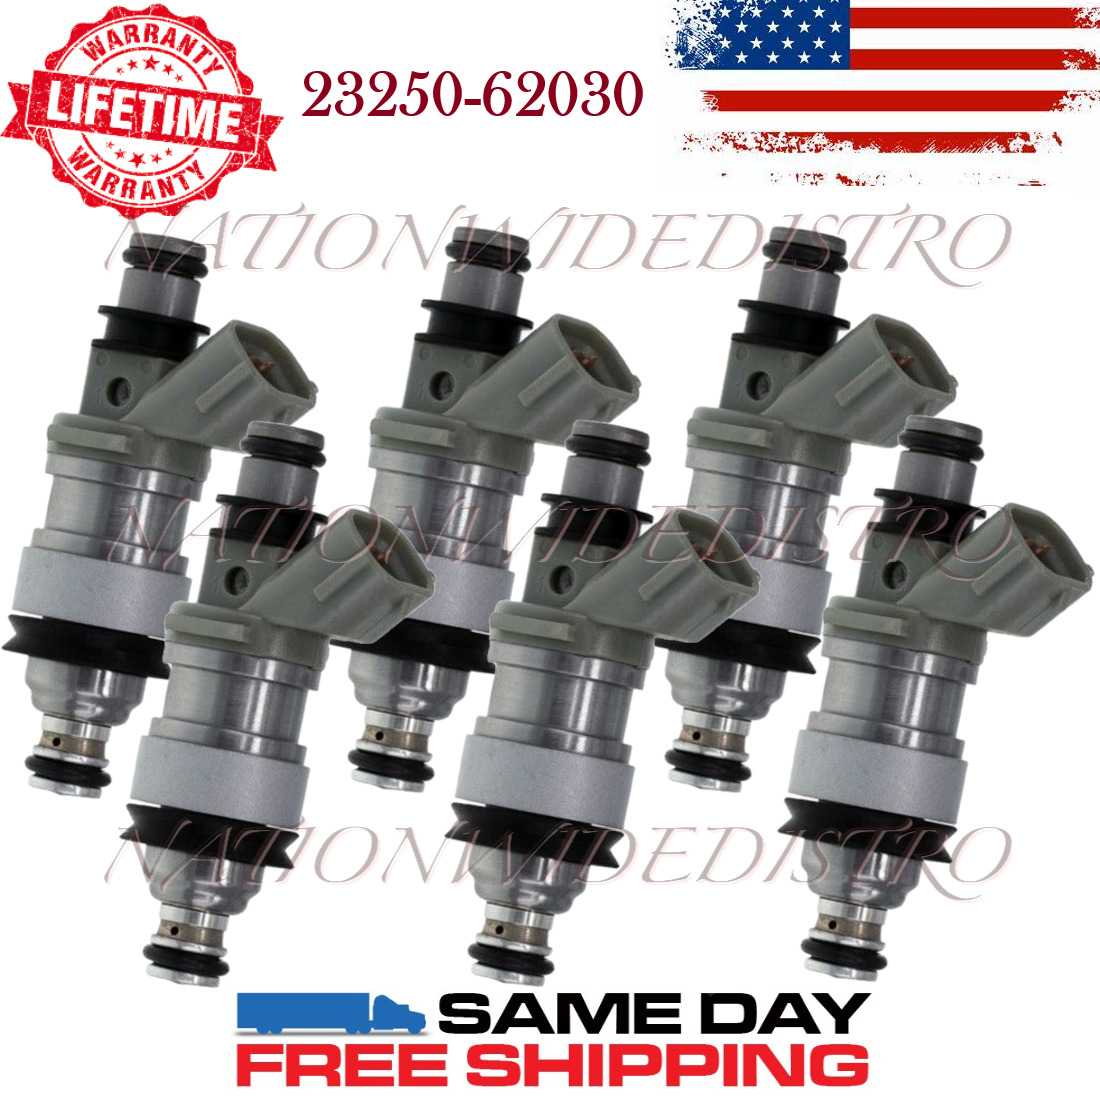 6x OEM Denso Fuel Injectors for 1992-1993 Toyota Camry 3.0L V6 23250-62030